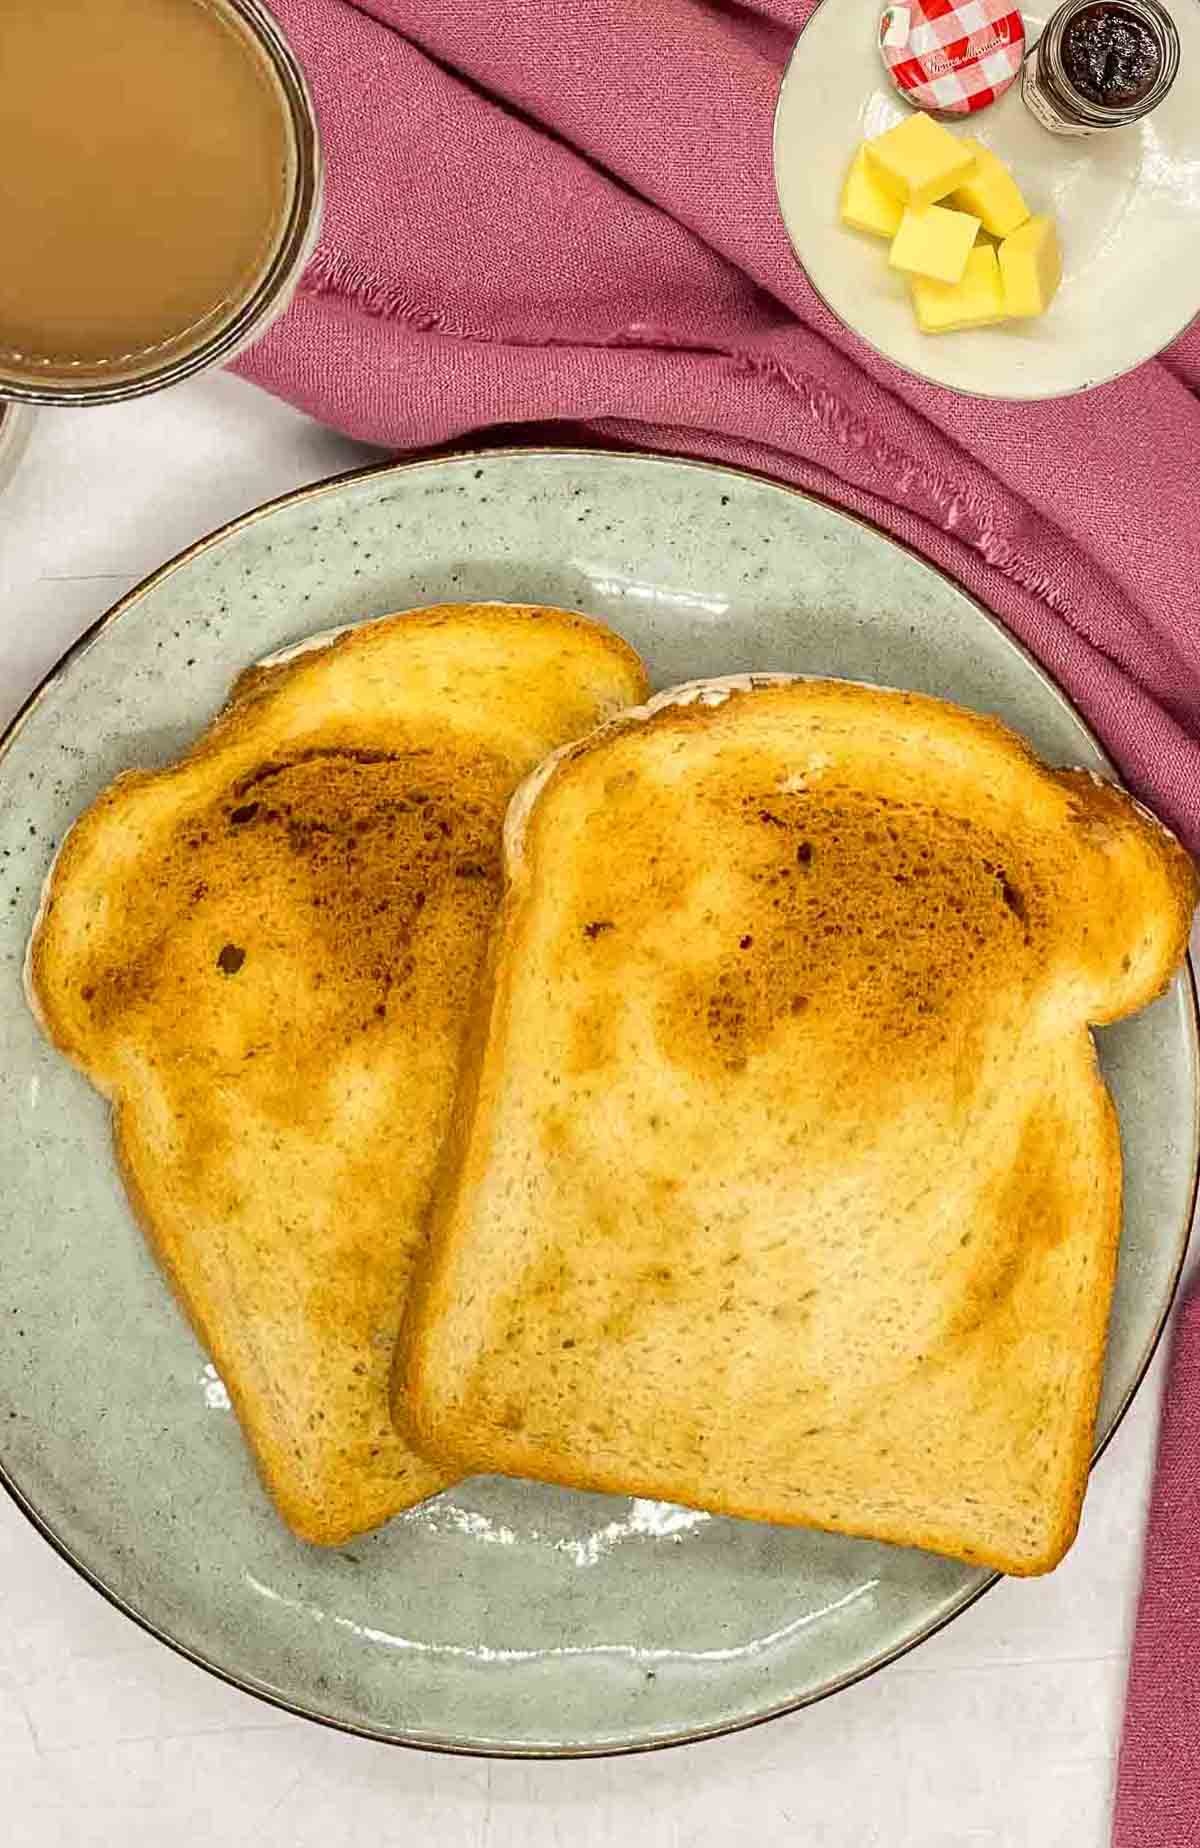 Overhead view of two sliced air-fried toasts placed on a plate.